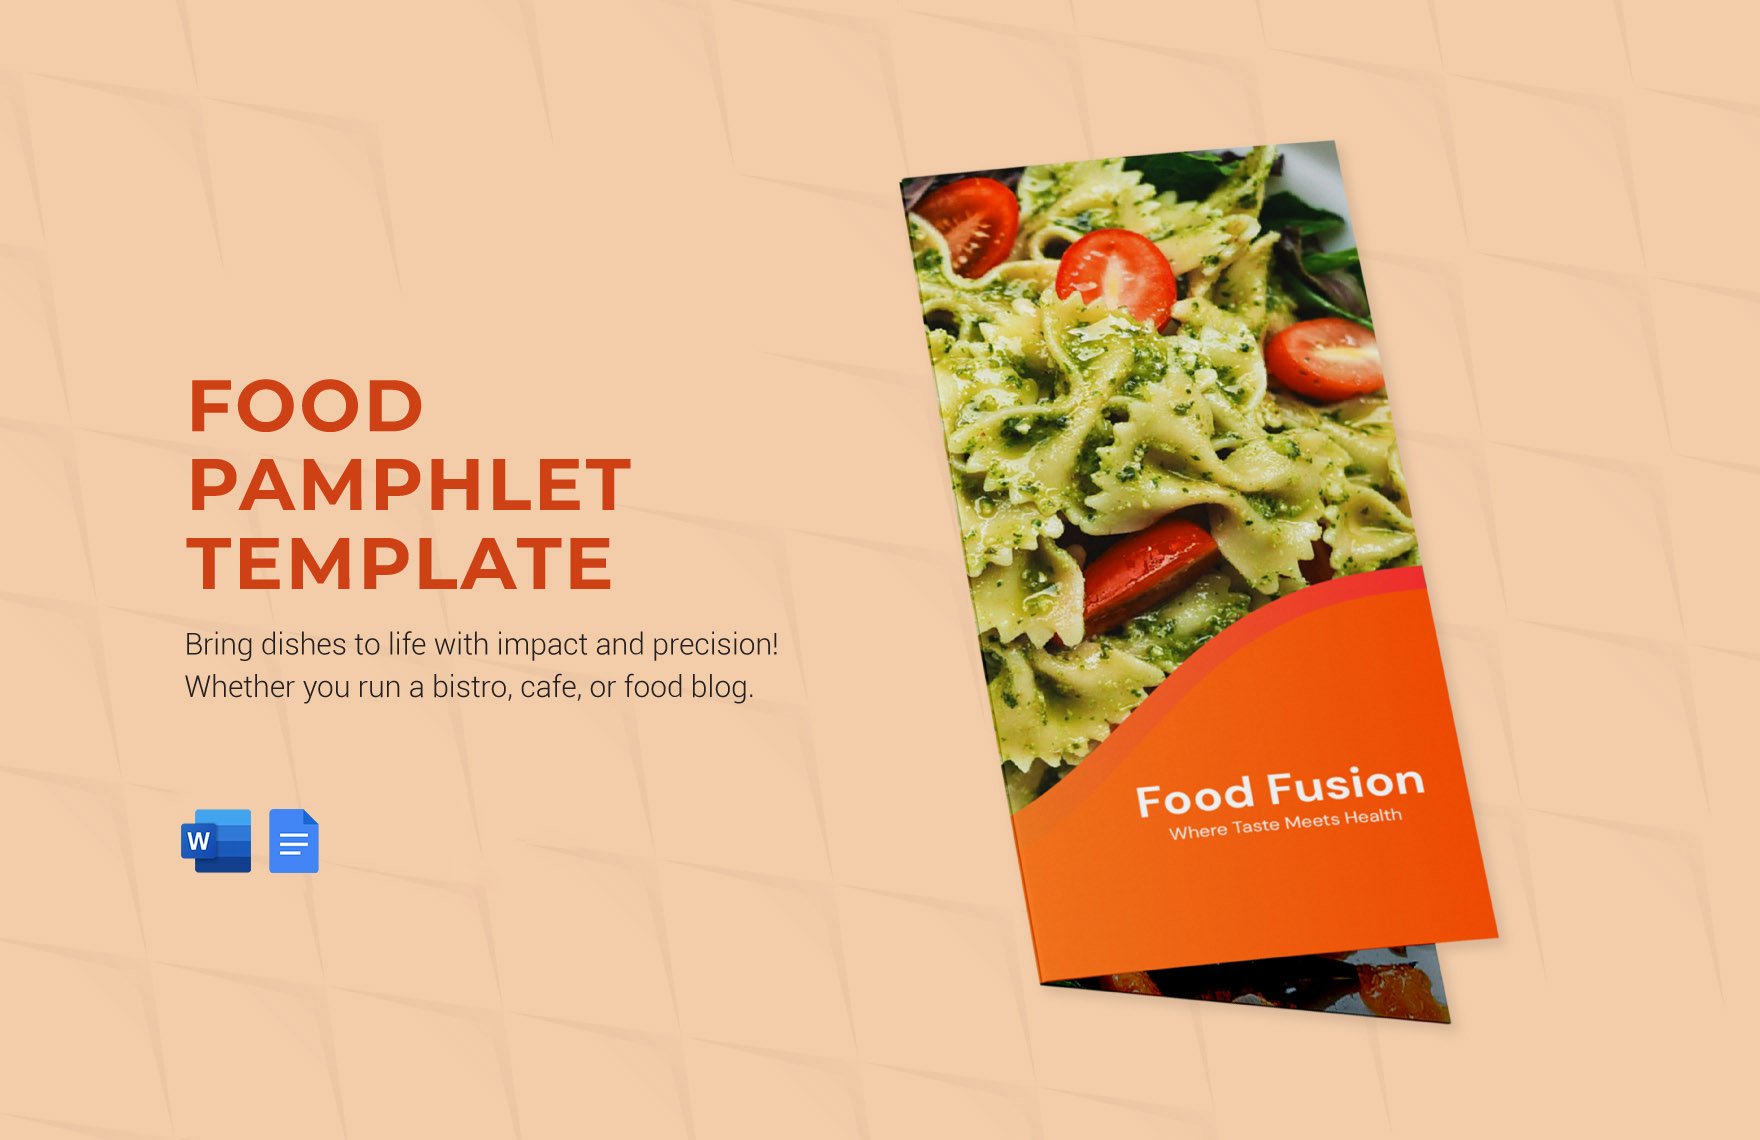 Food Pamphlet Template